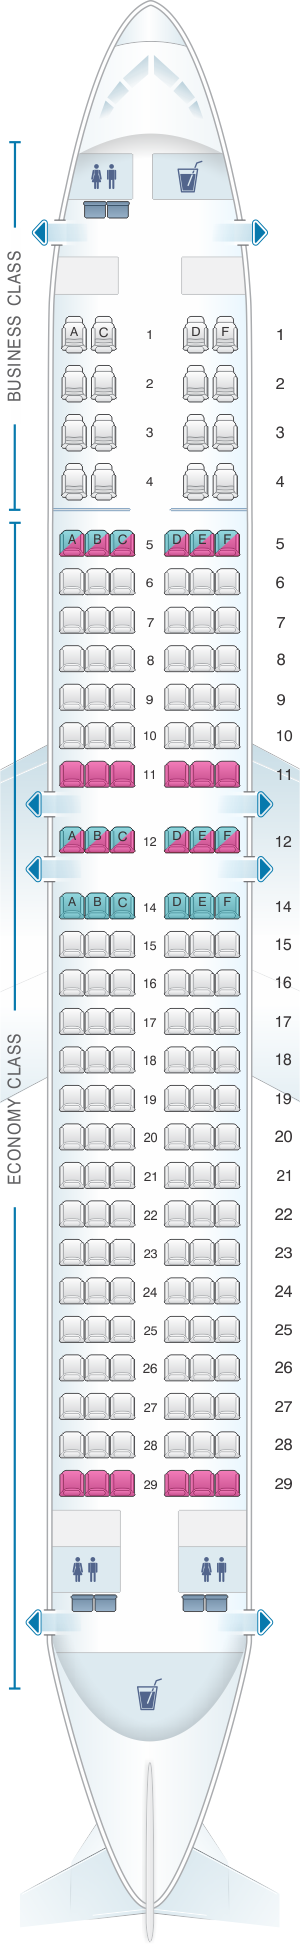 Seat map for Malaysia Airlines Boeing B737 800 160PAX